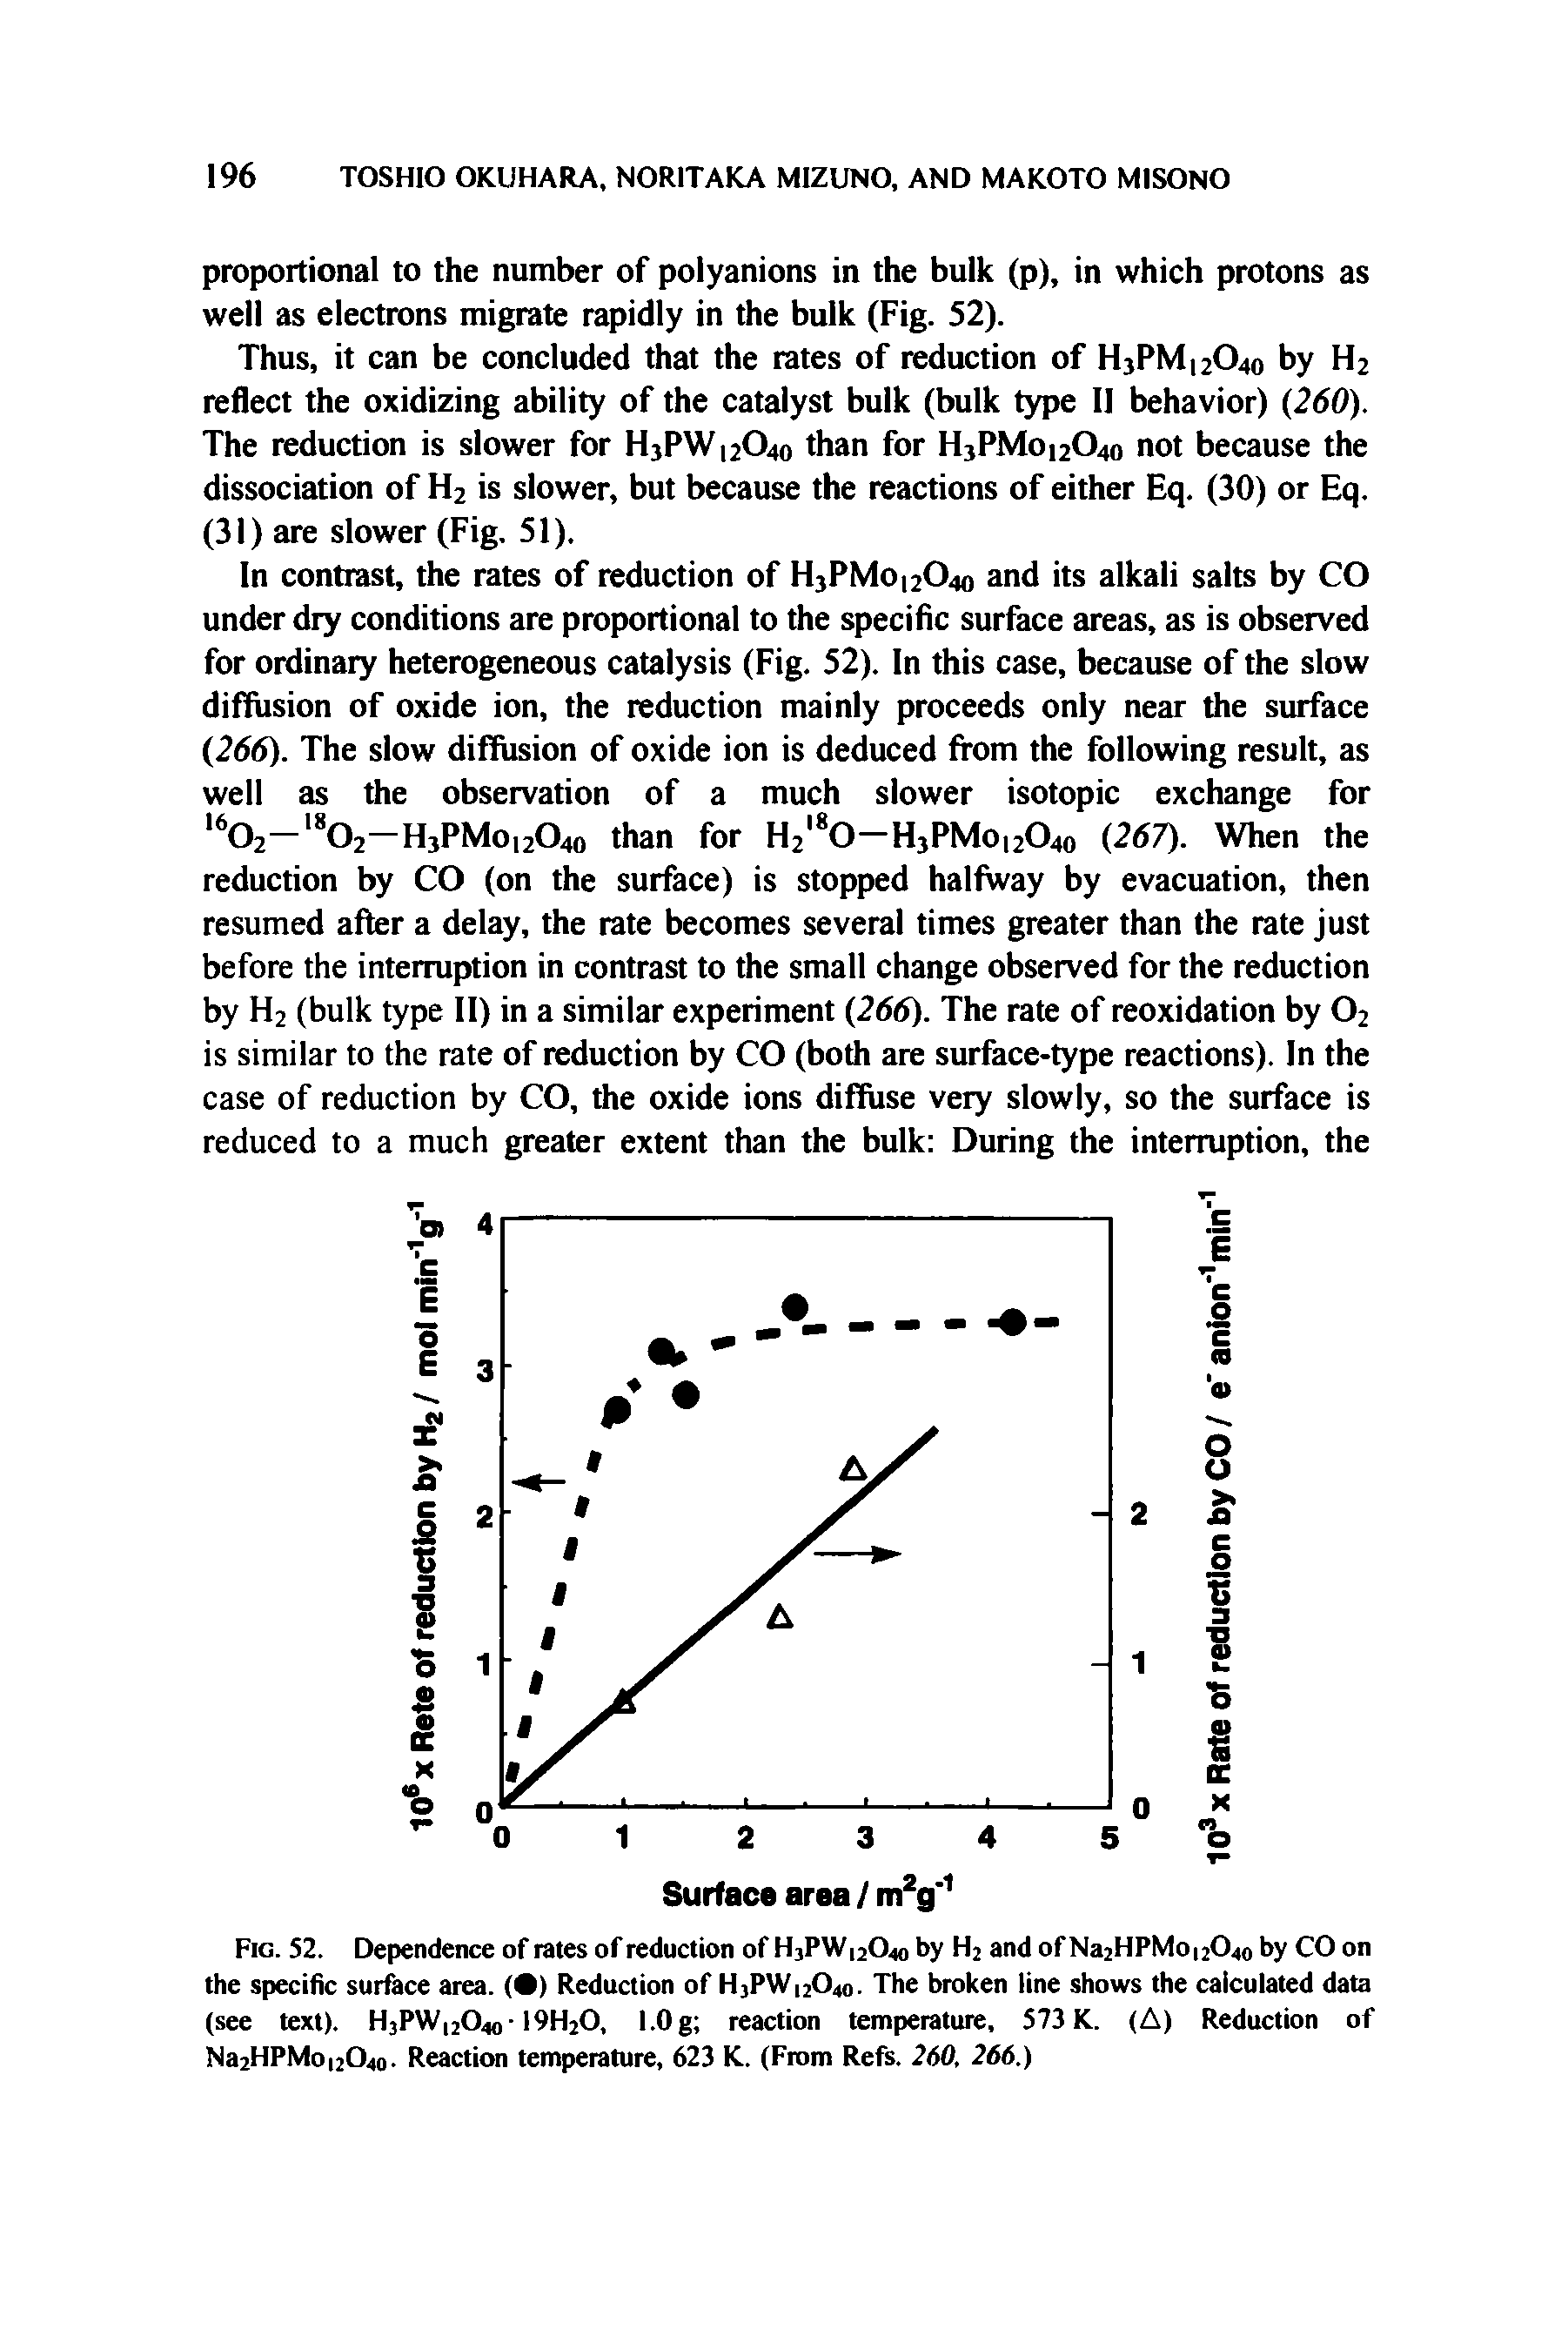 Fig. 52. Dependence of rates of reduction of H3PW12O40 by H2 and ofNa2HPMoi20. o by CO on the specific surface area. ( ) Reduction of HjPW 204o. The broken line shows the calculated data (see text). H3PW 2O40- 19H20, 1.0 g reaction temperature, 573 K. (A) Reduction of Na2HPMoi204o. Reaction temperature, 623 K. (From Refs. 260, 266.)...